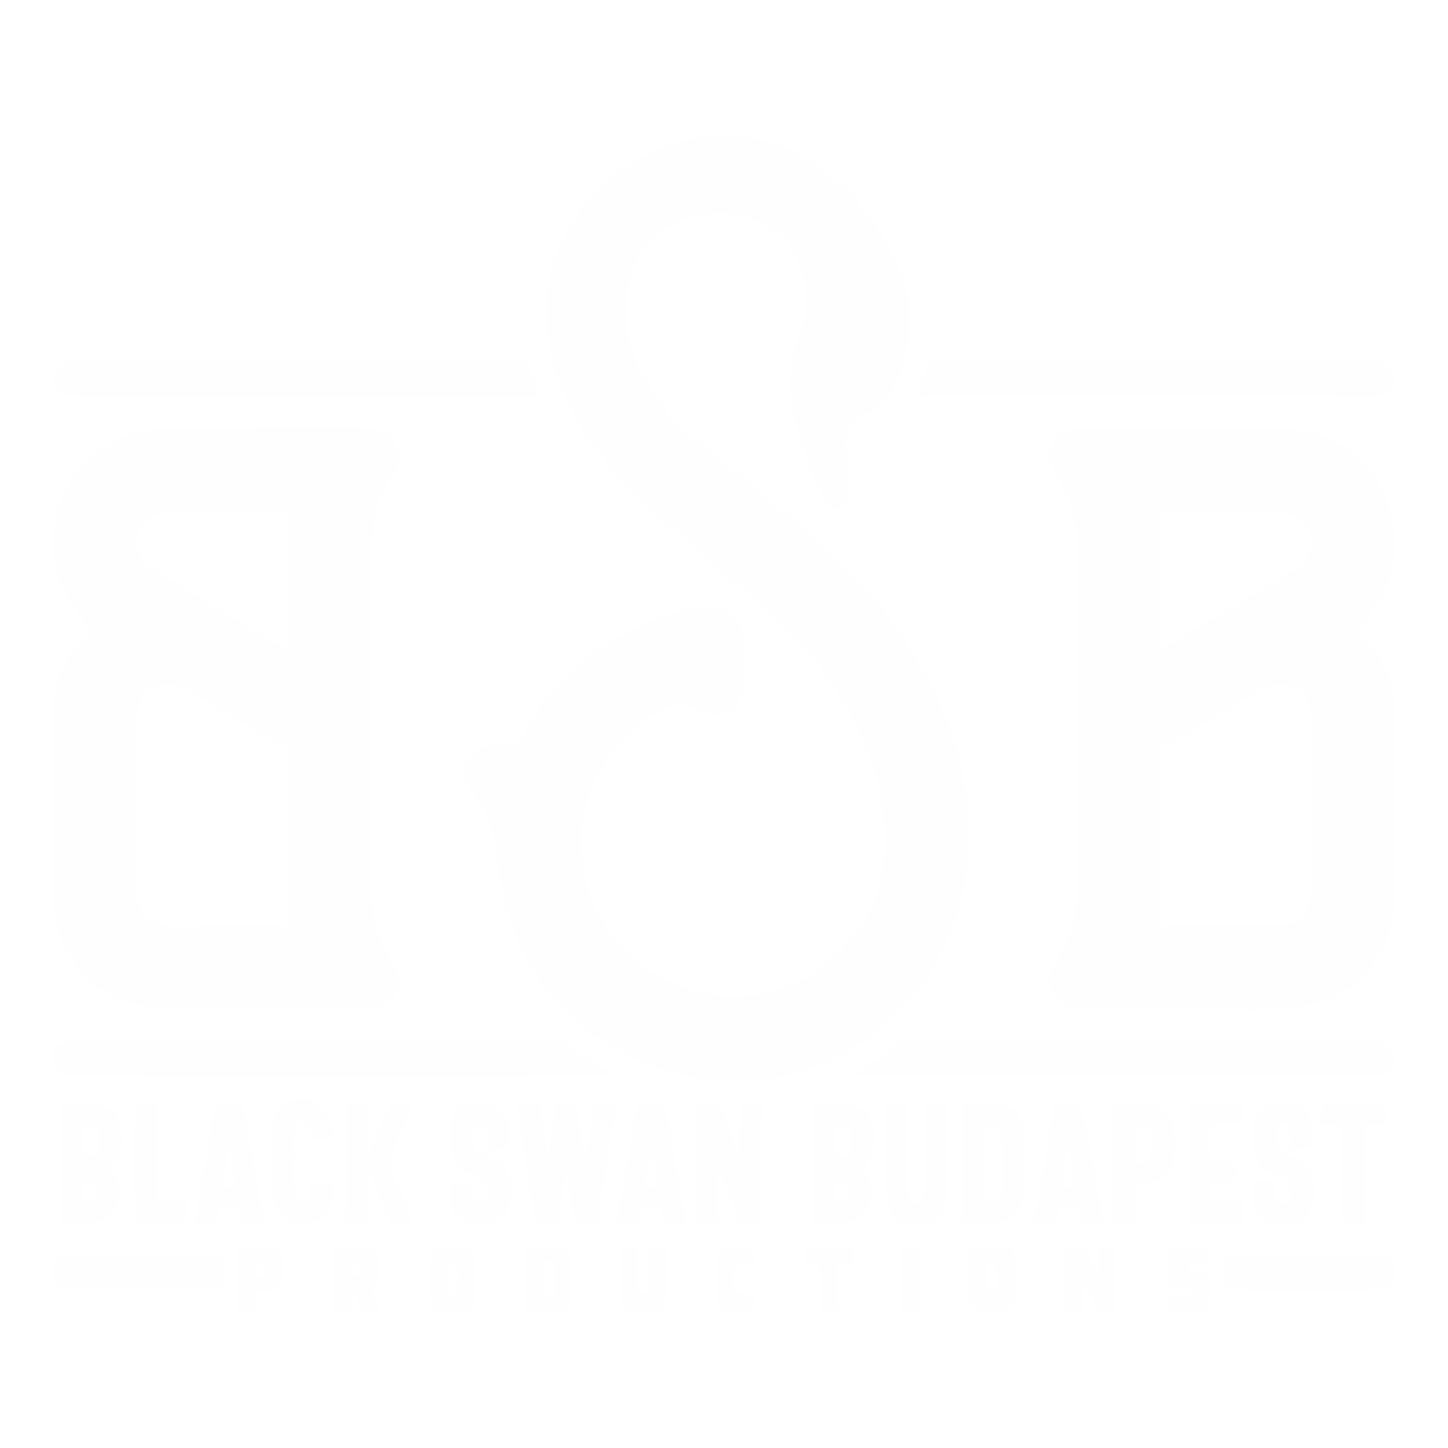 Black Swan Budapest - Film Production Services